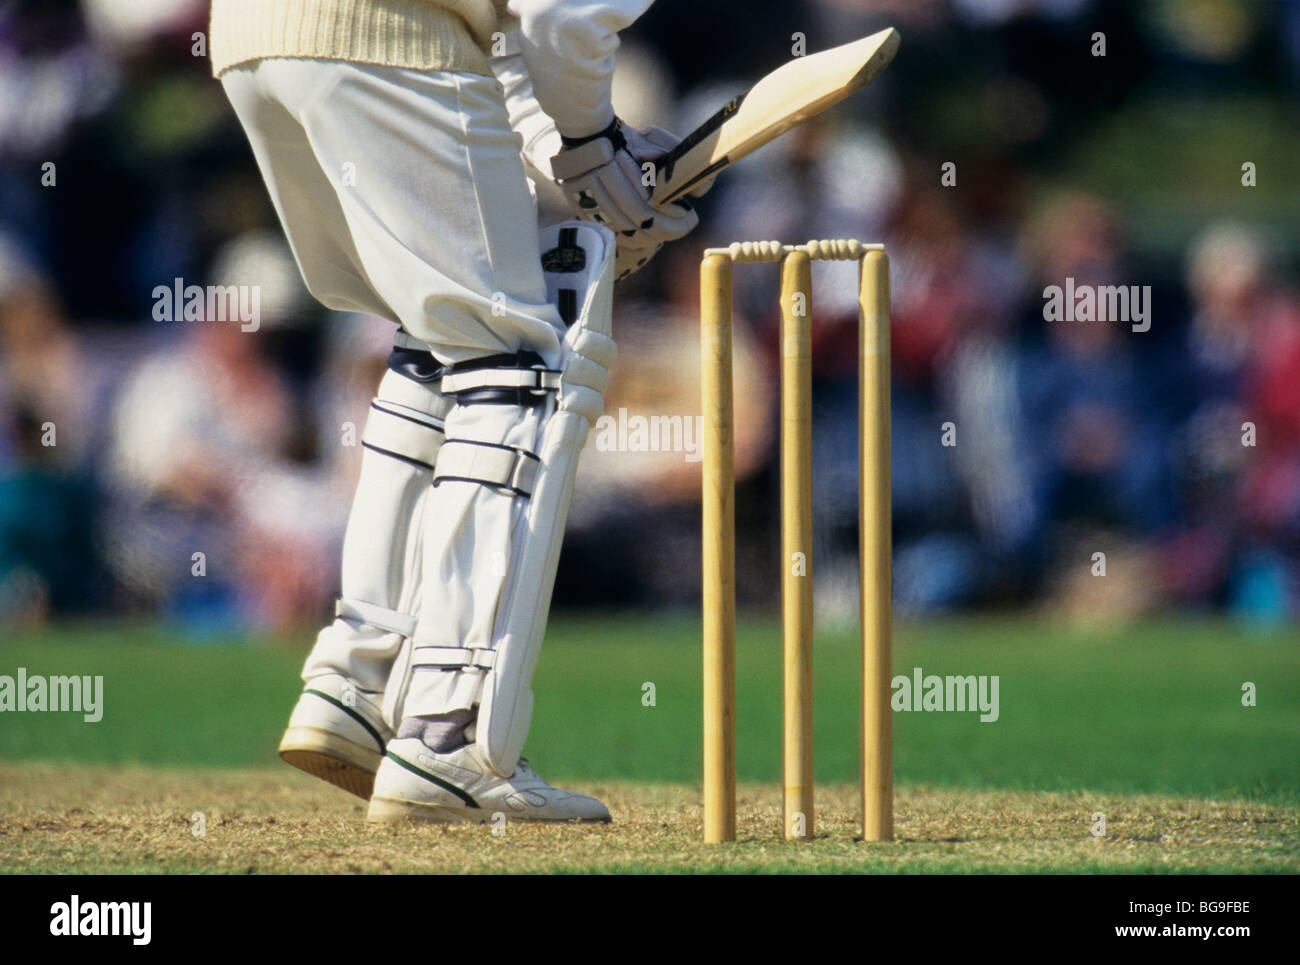 Close up of a cricket player about to hit a ball during a match Stock Photo